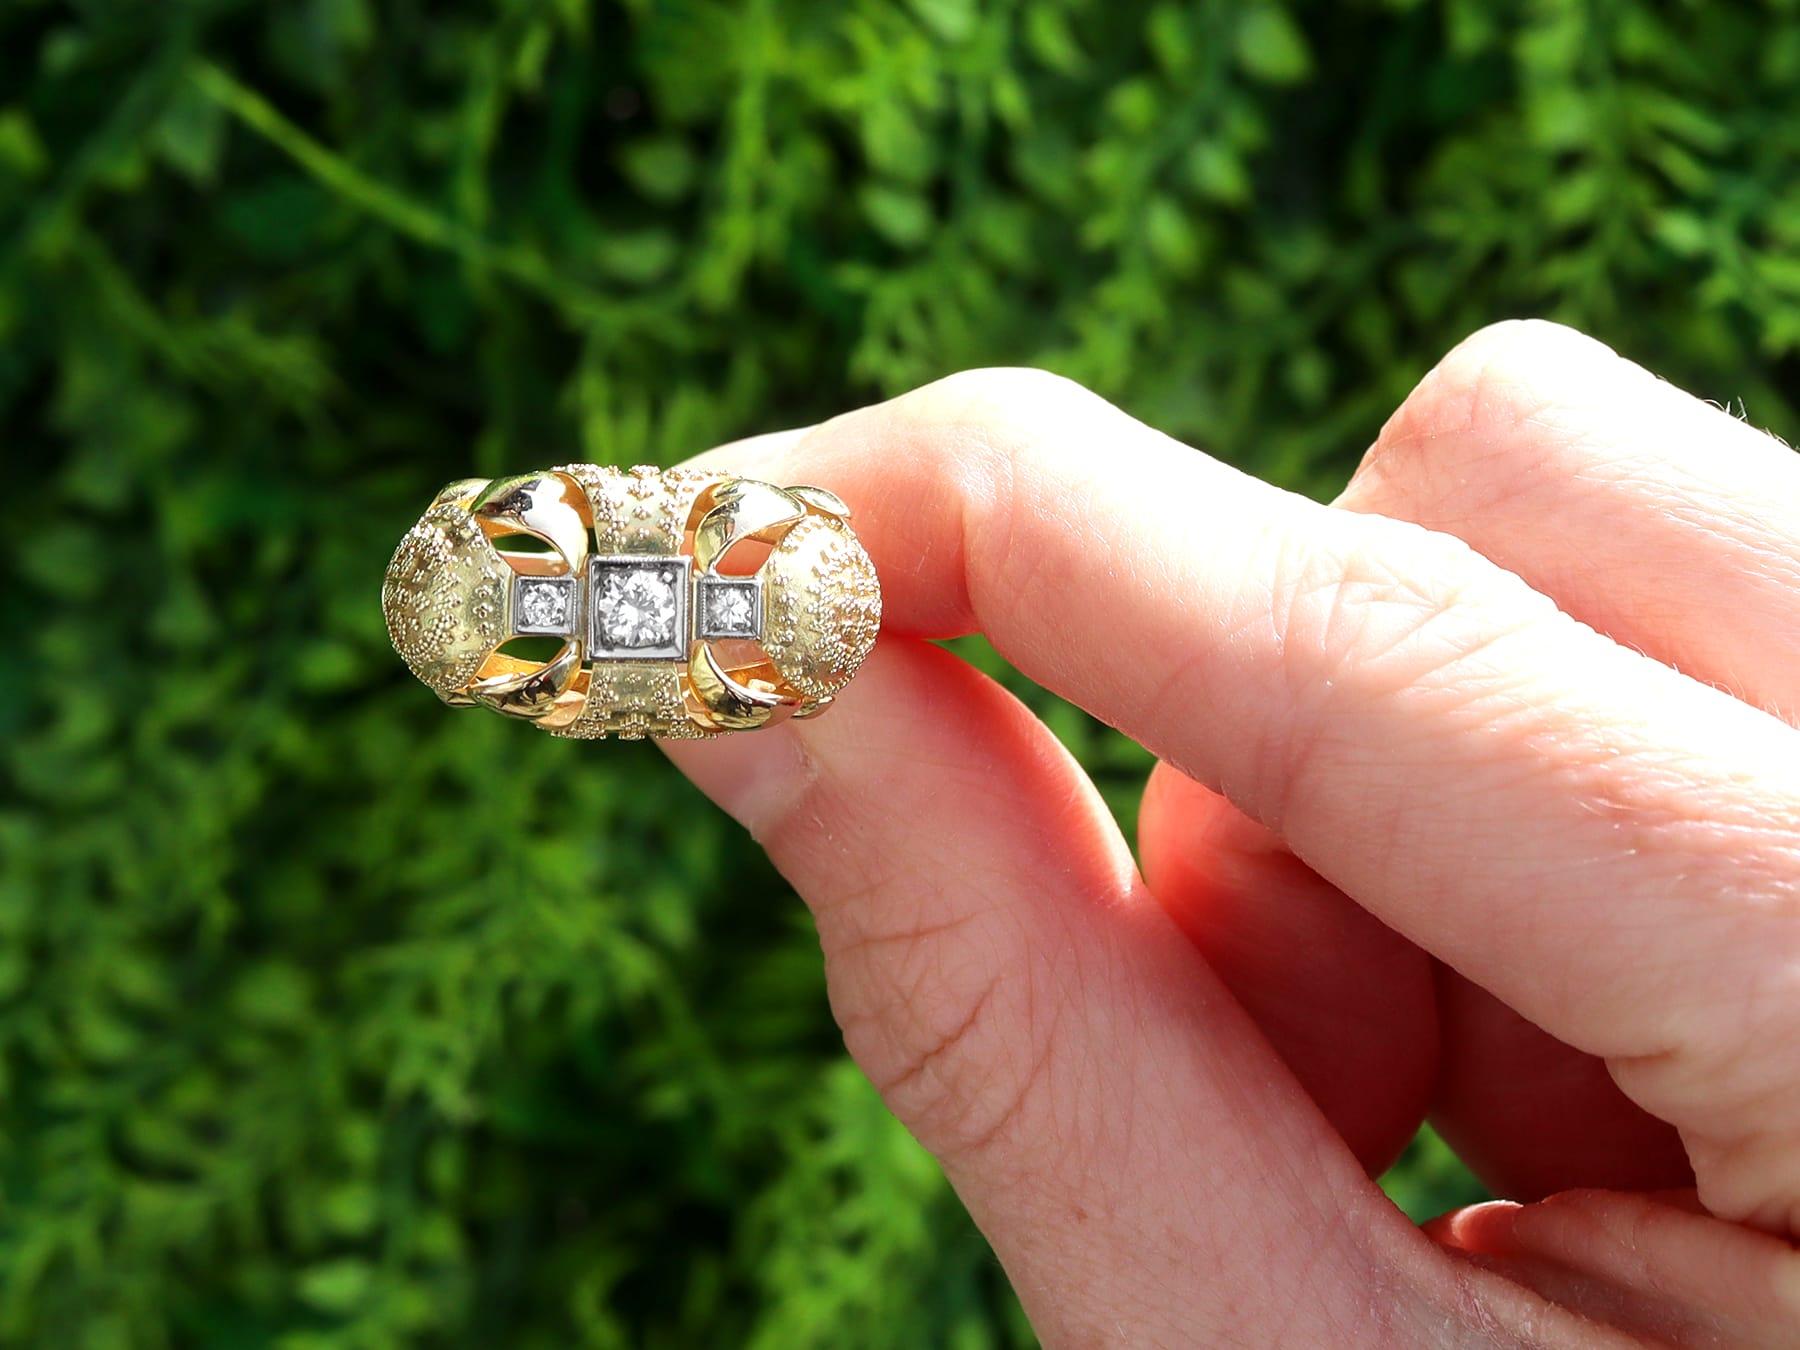 A stunning, fine and impressive vintage 0.28 carat diamond and 14 karat yellow gold, 14 karat white gold set Art Deco dress ring; part of our diverse diamond jewellery and estate jewelry collections.

This stunning, fine and impressive Art Deco